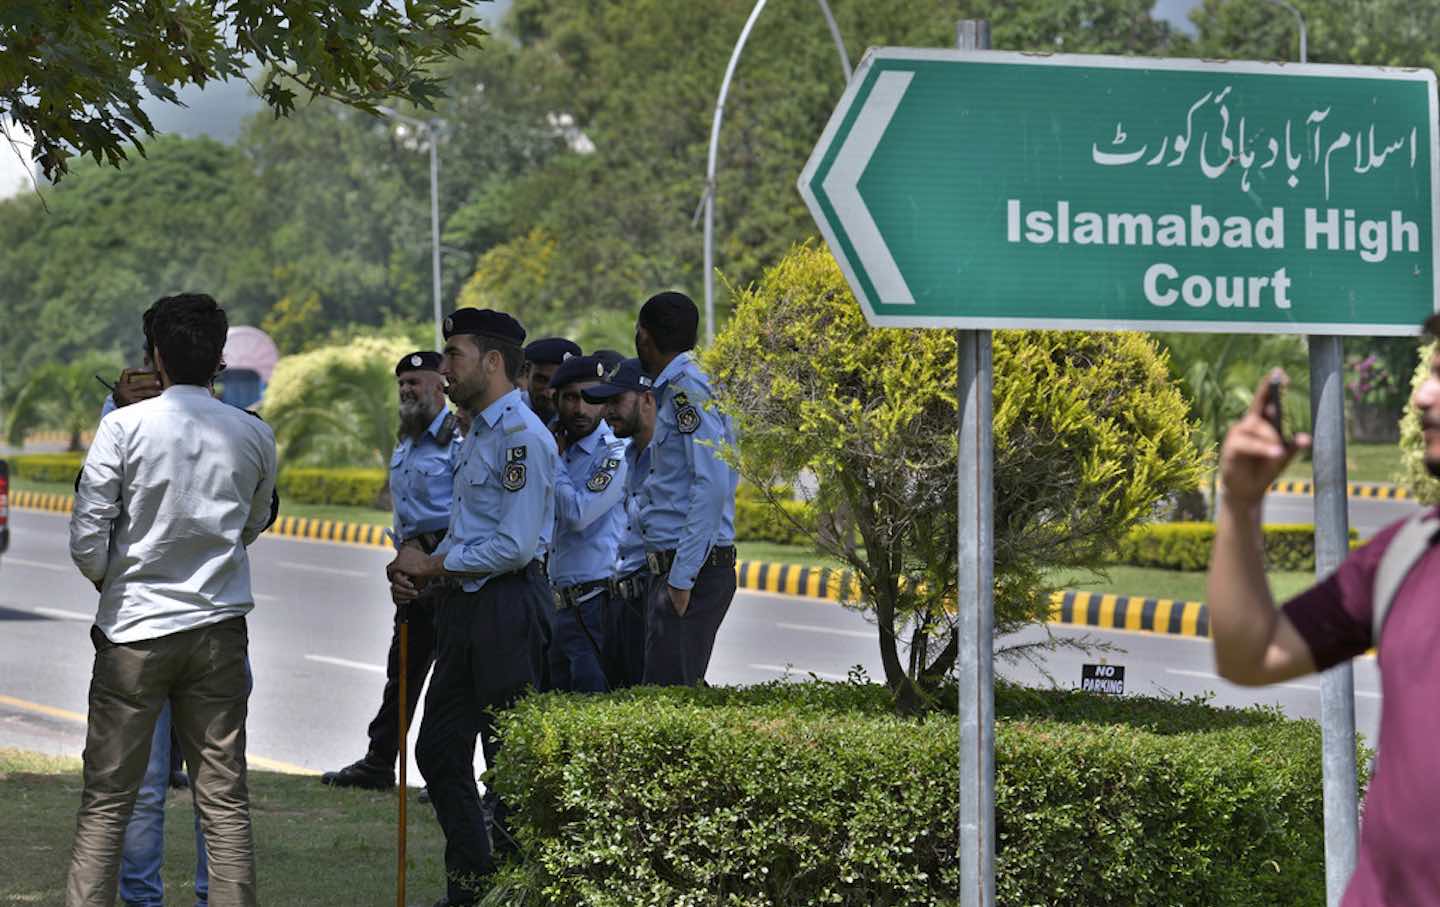 Pakistani Judges Have Accused Military “Intelligence Operatives” of “Coercion or Blackmail”